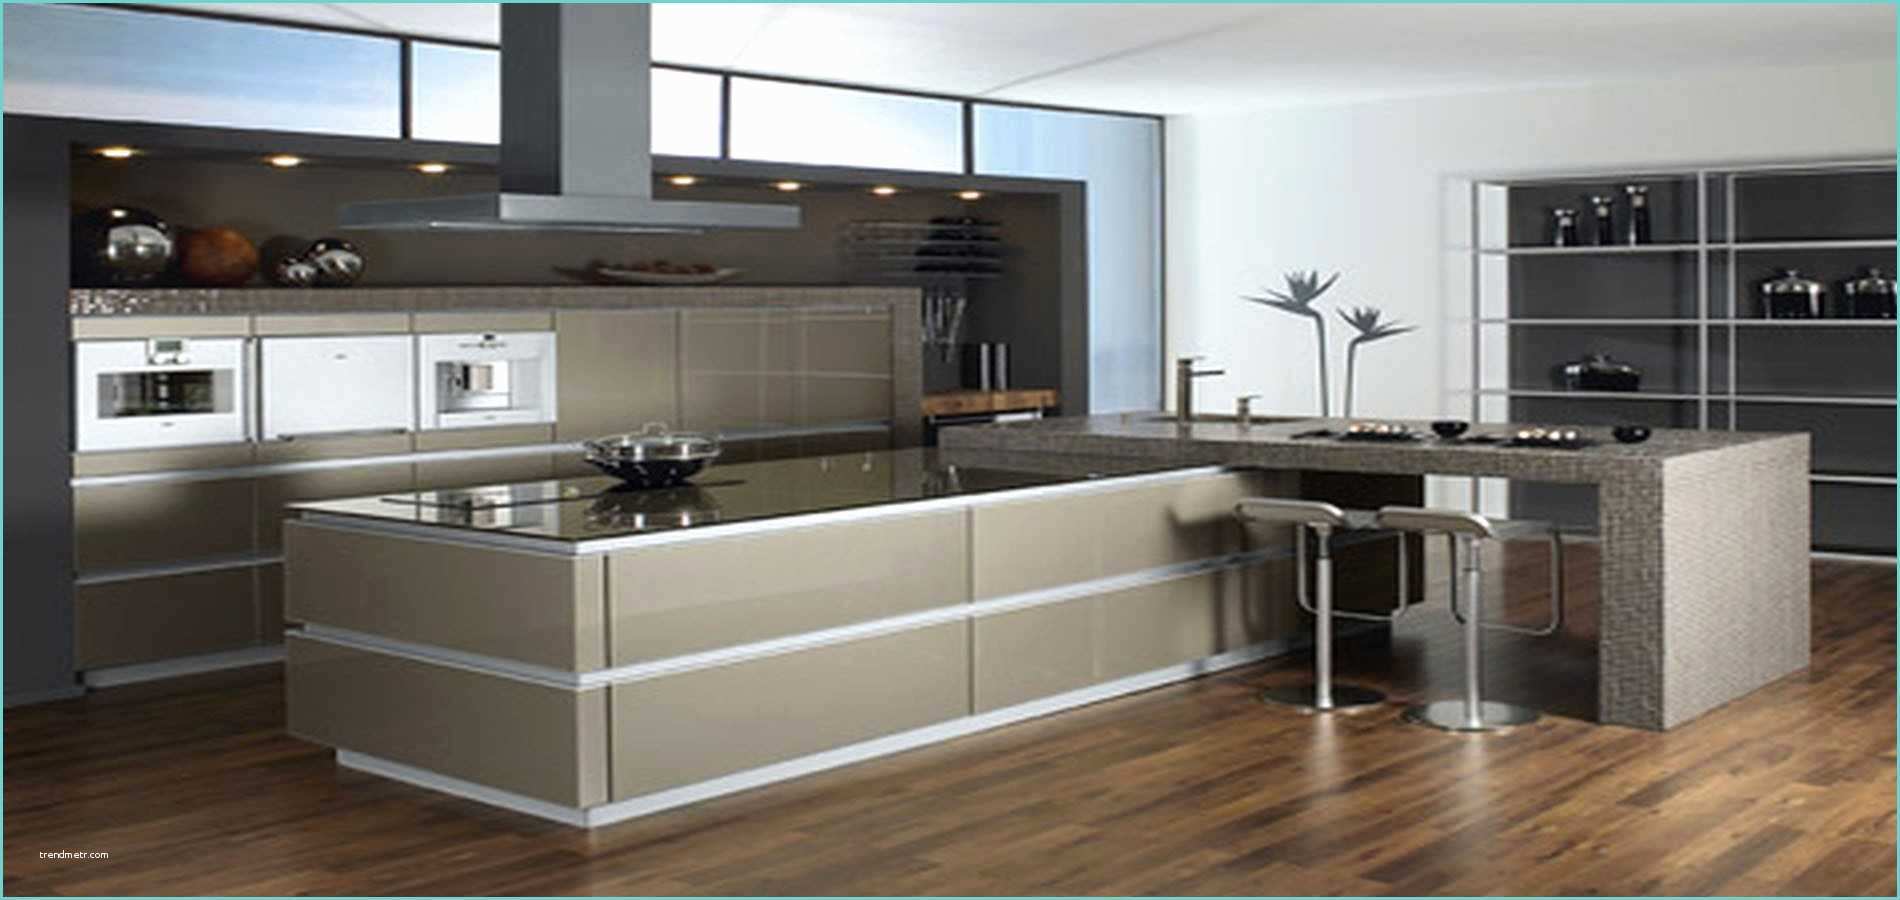 amazing photograph of built in kitchen cabinet price malaysia